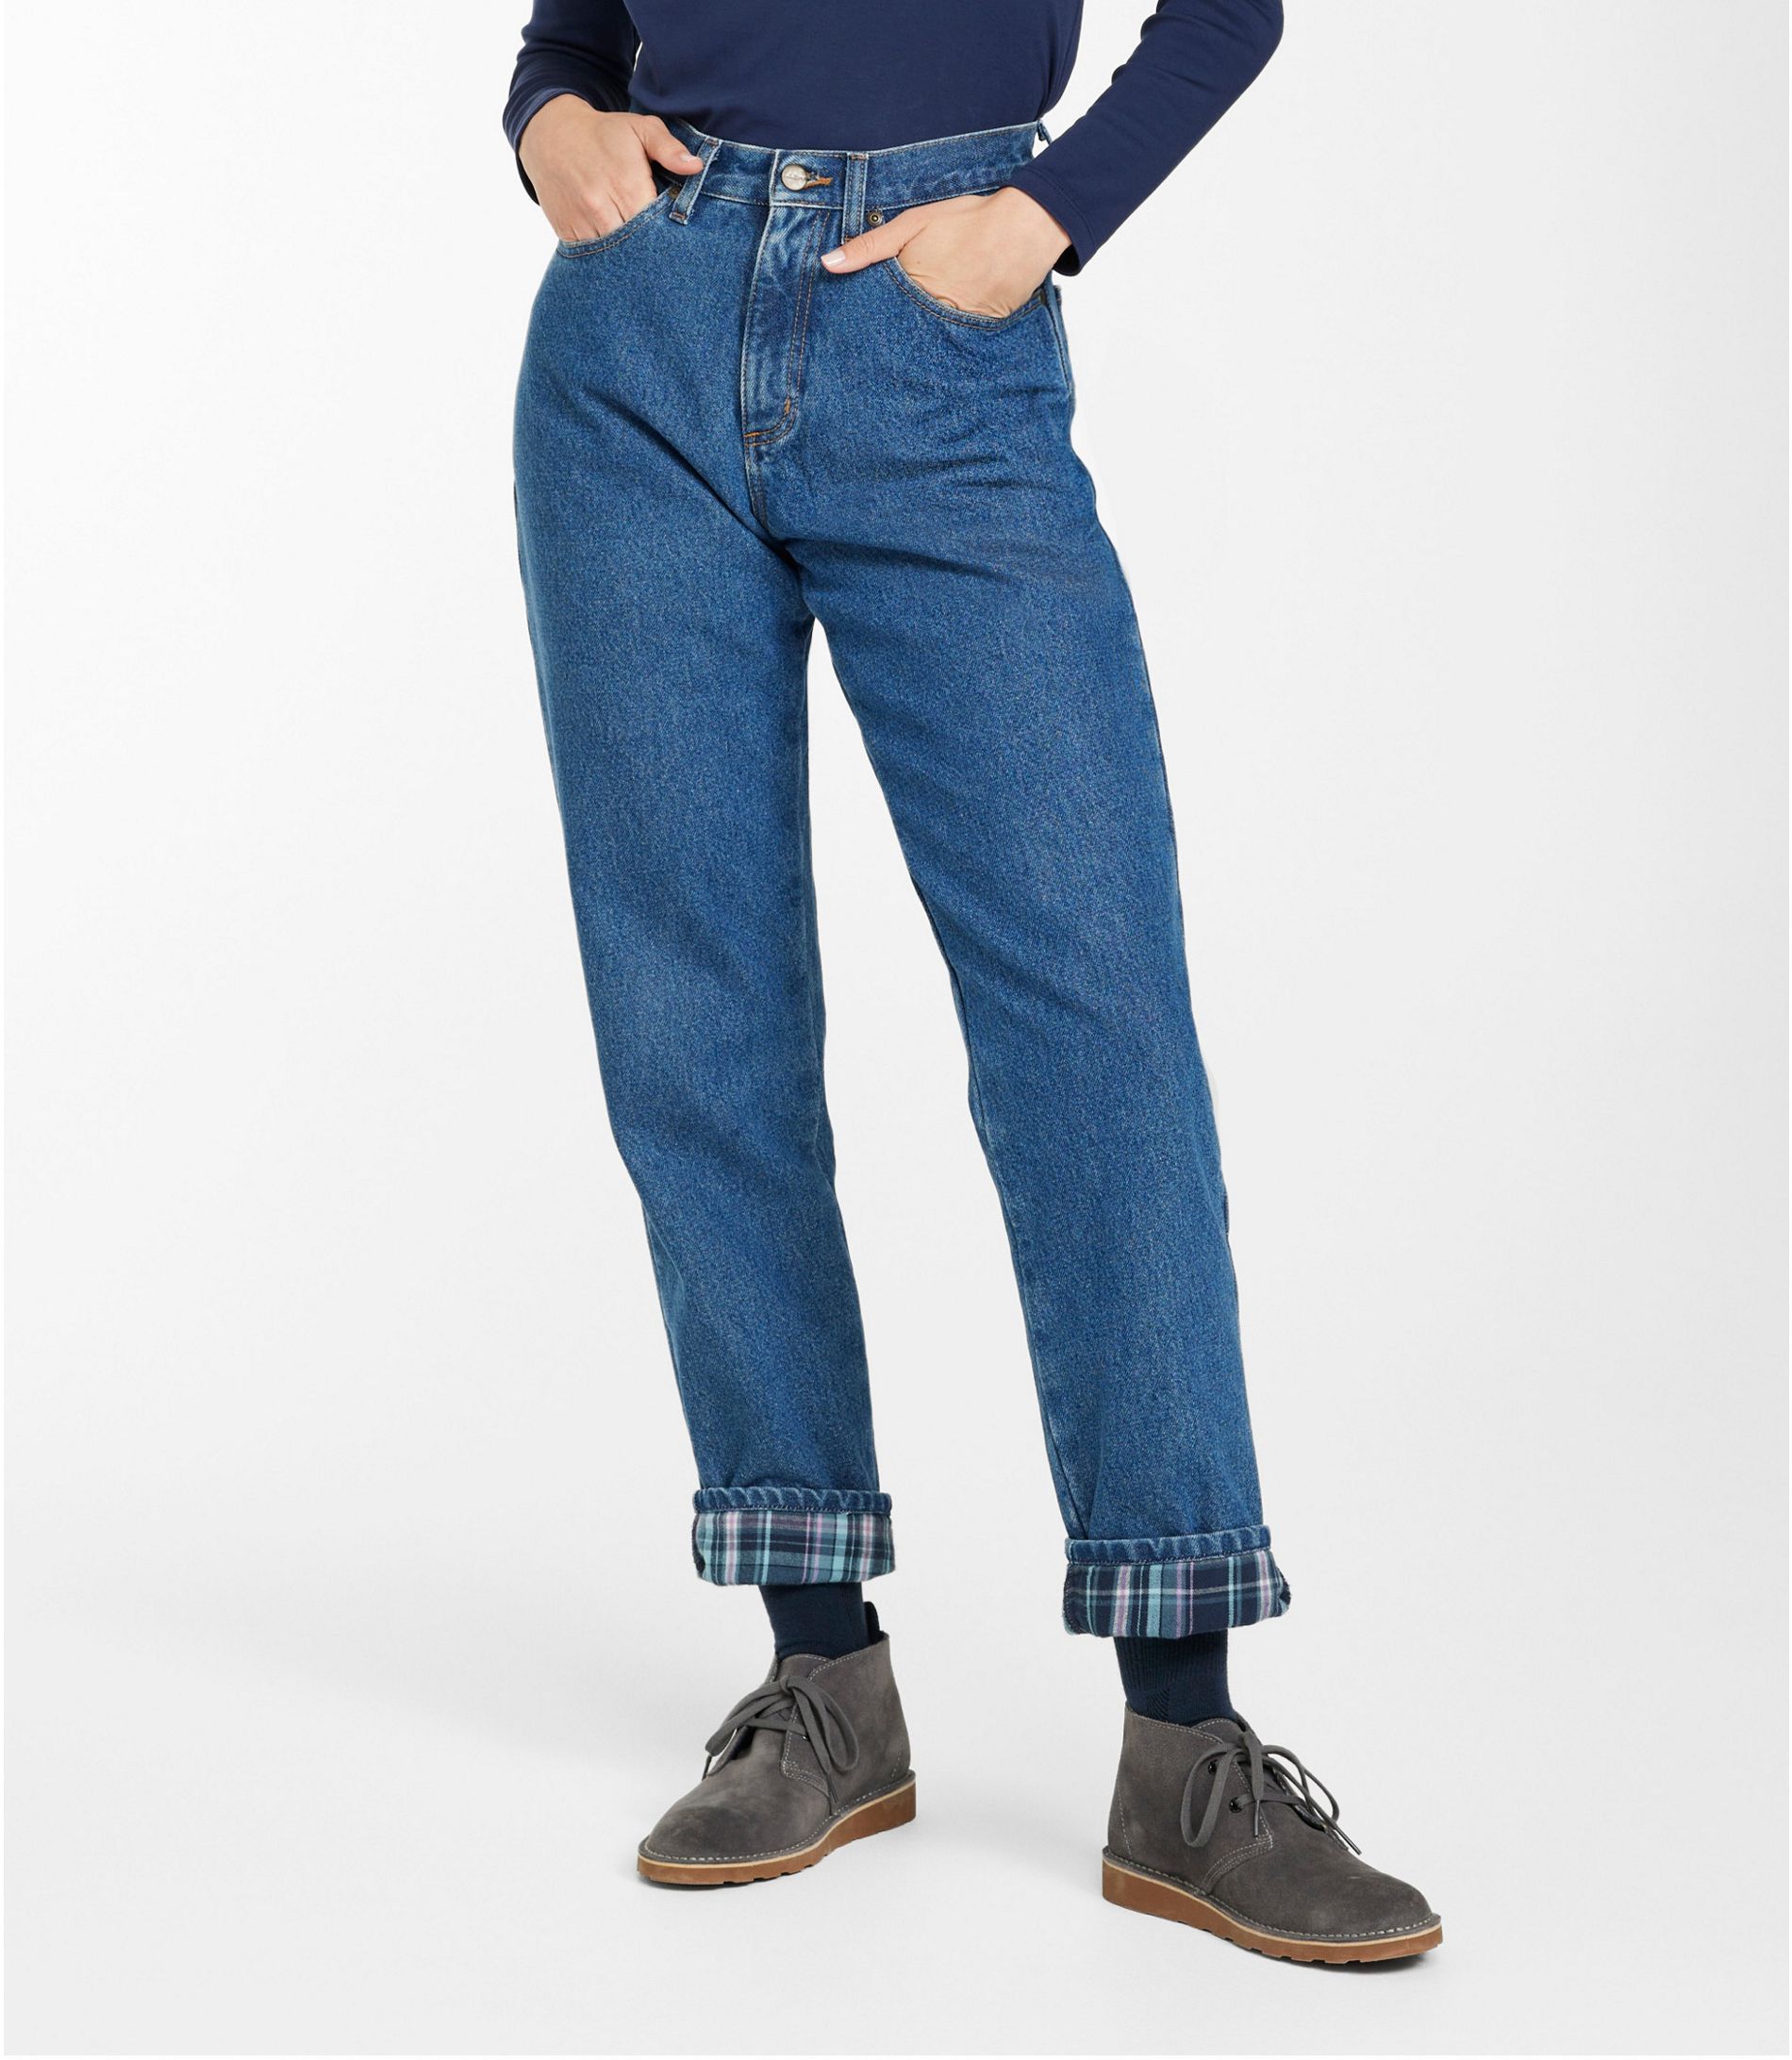 Toddler Fleece-Lined Straight Jeans | Gap Factory